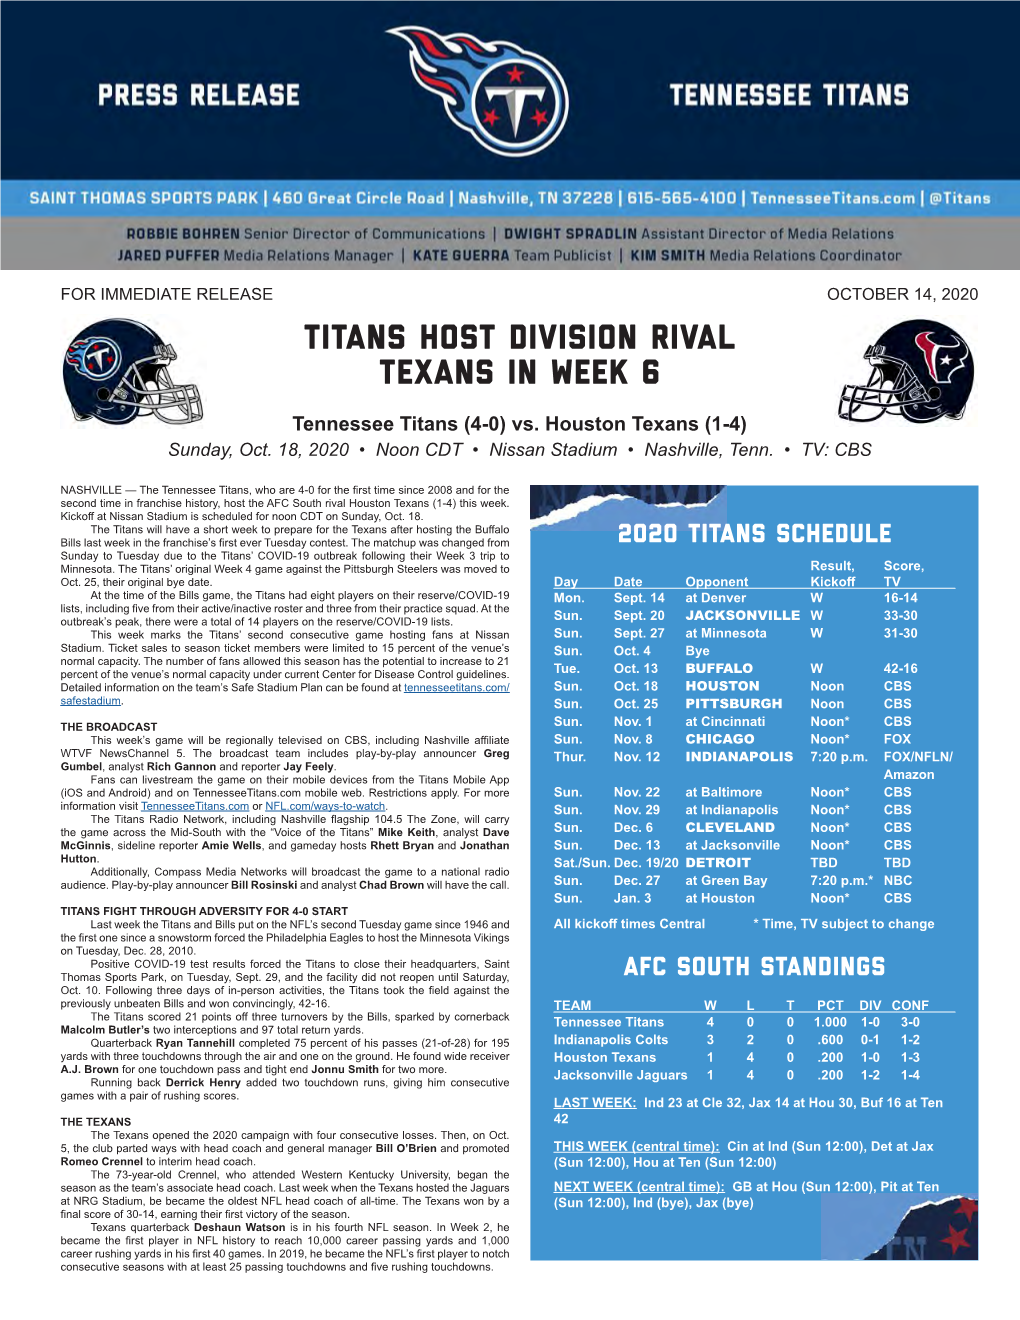 Titans Host Division Rival Texans in Week 6